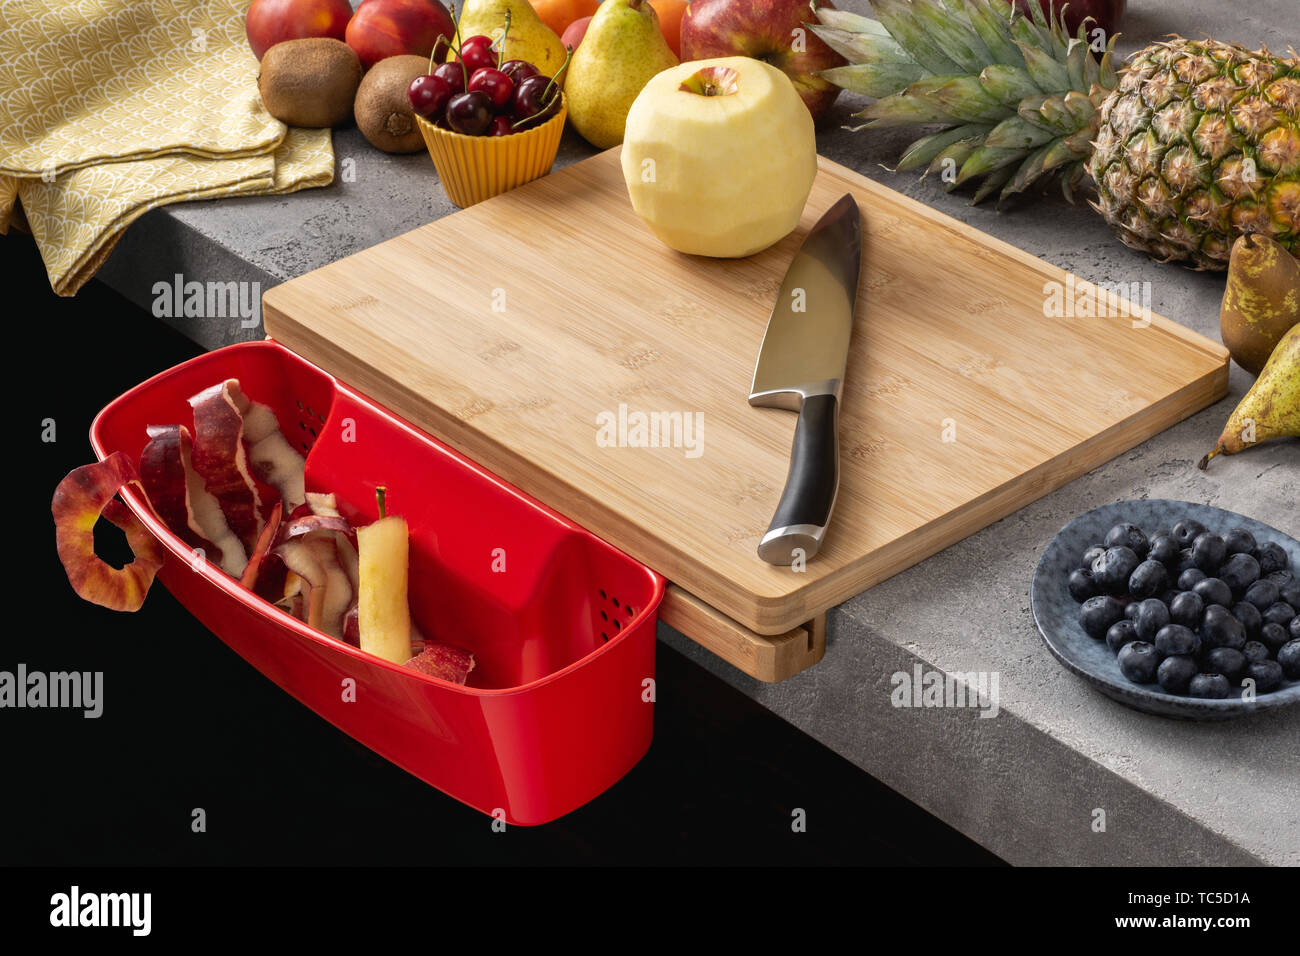 Wood Cutting Board with Waste Container, Santoku Chef Knife and Fresh Fruits. Healthy Eating Concept. Stock Photo